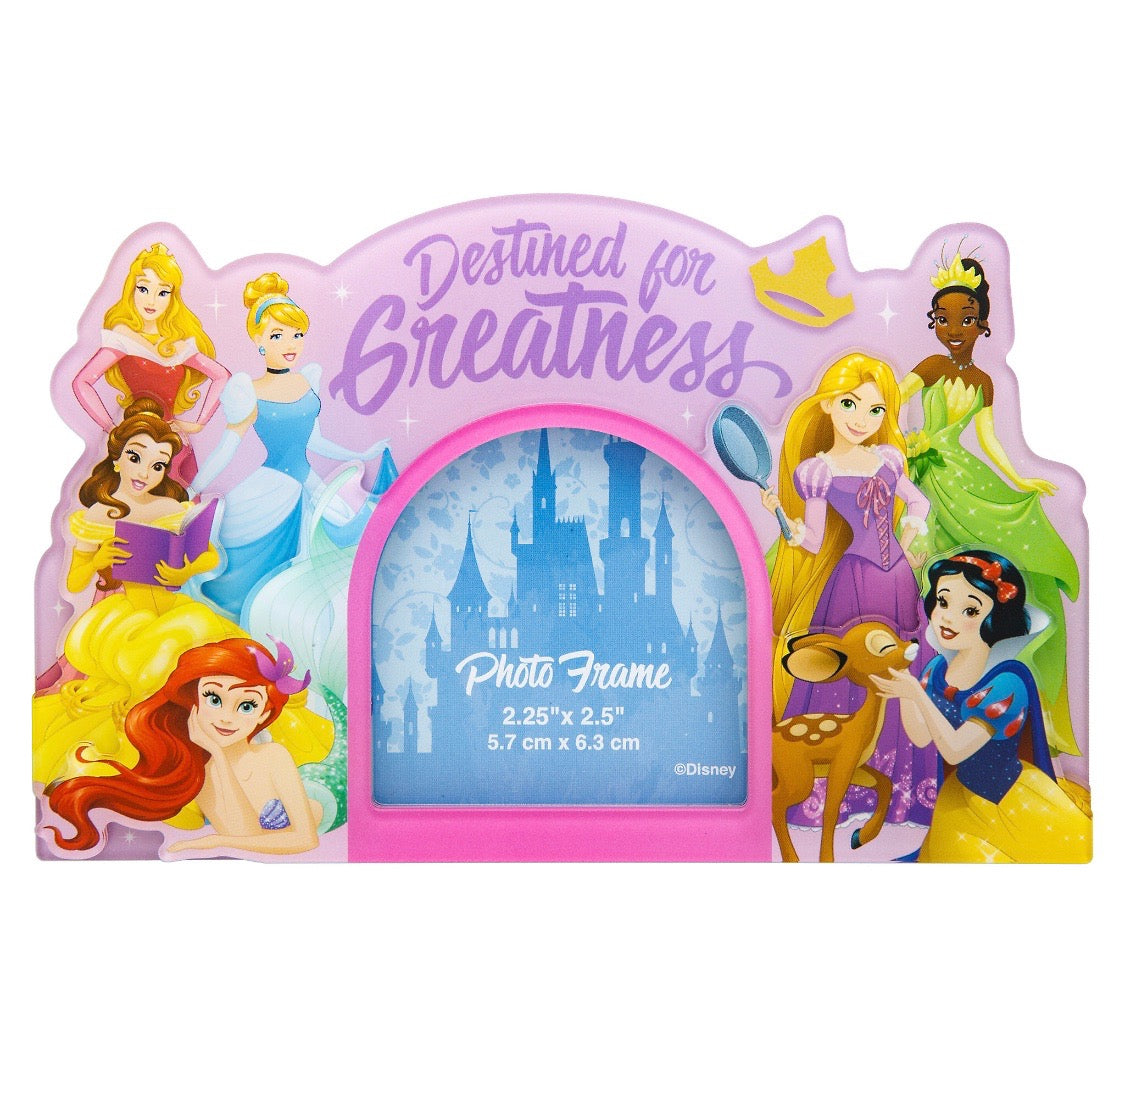 Disney Parks Princess Destined for Greatness Magnet New